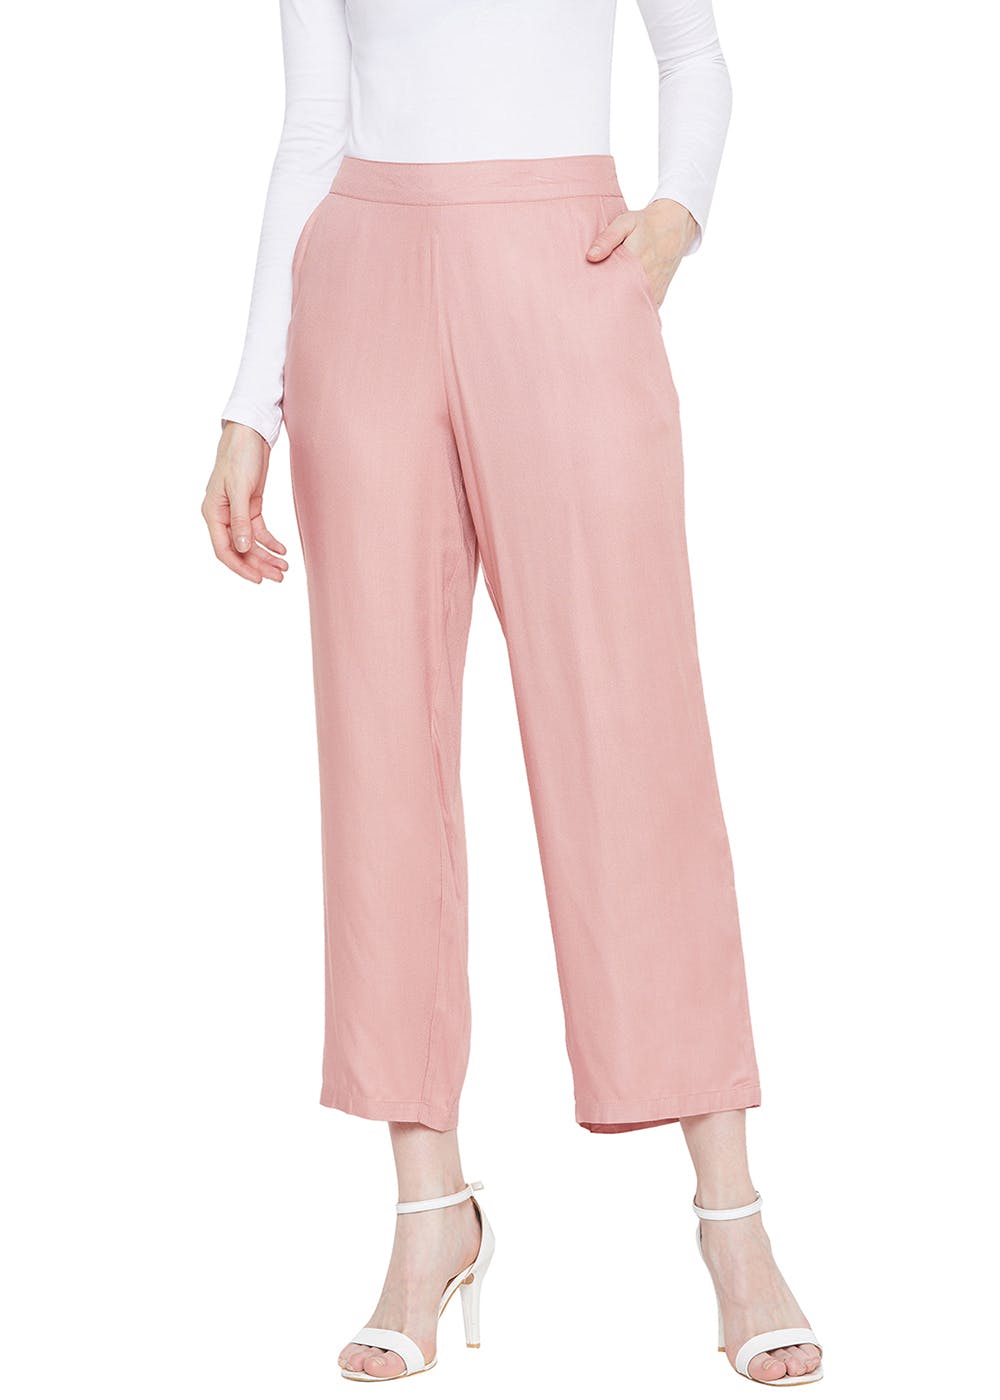 Get Solid Flared Pants at ₹ 650 | LBB Shop